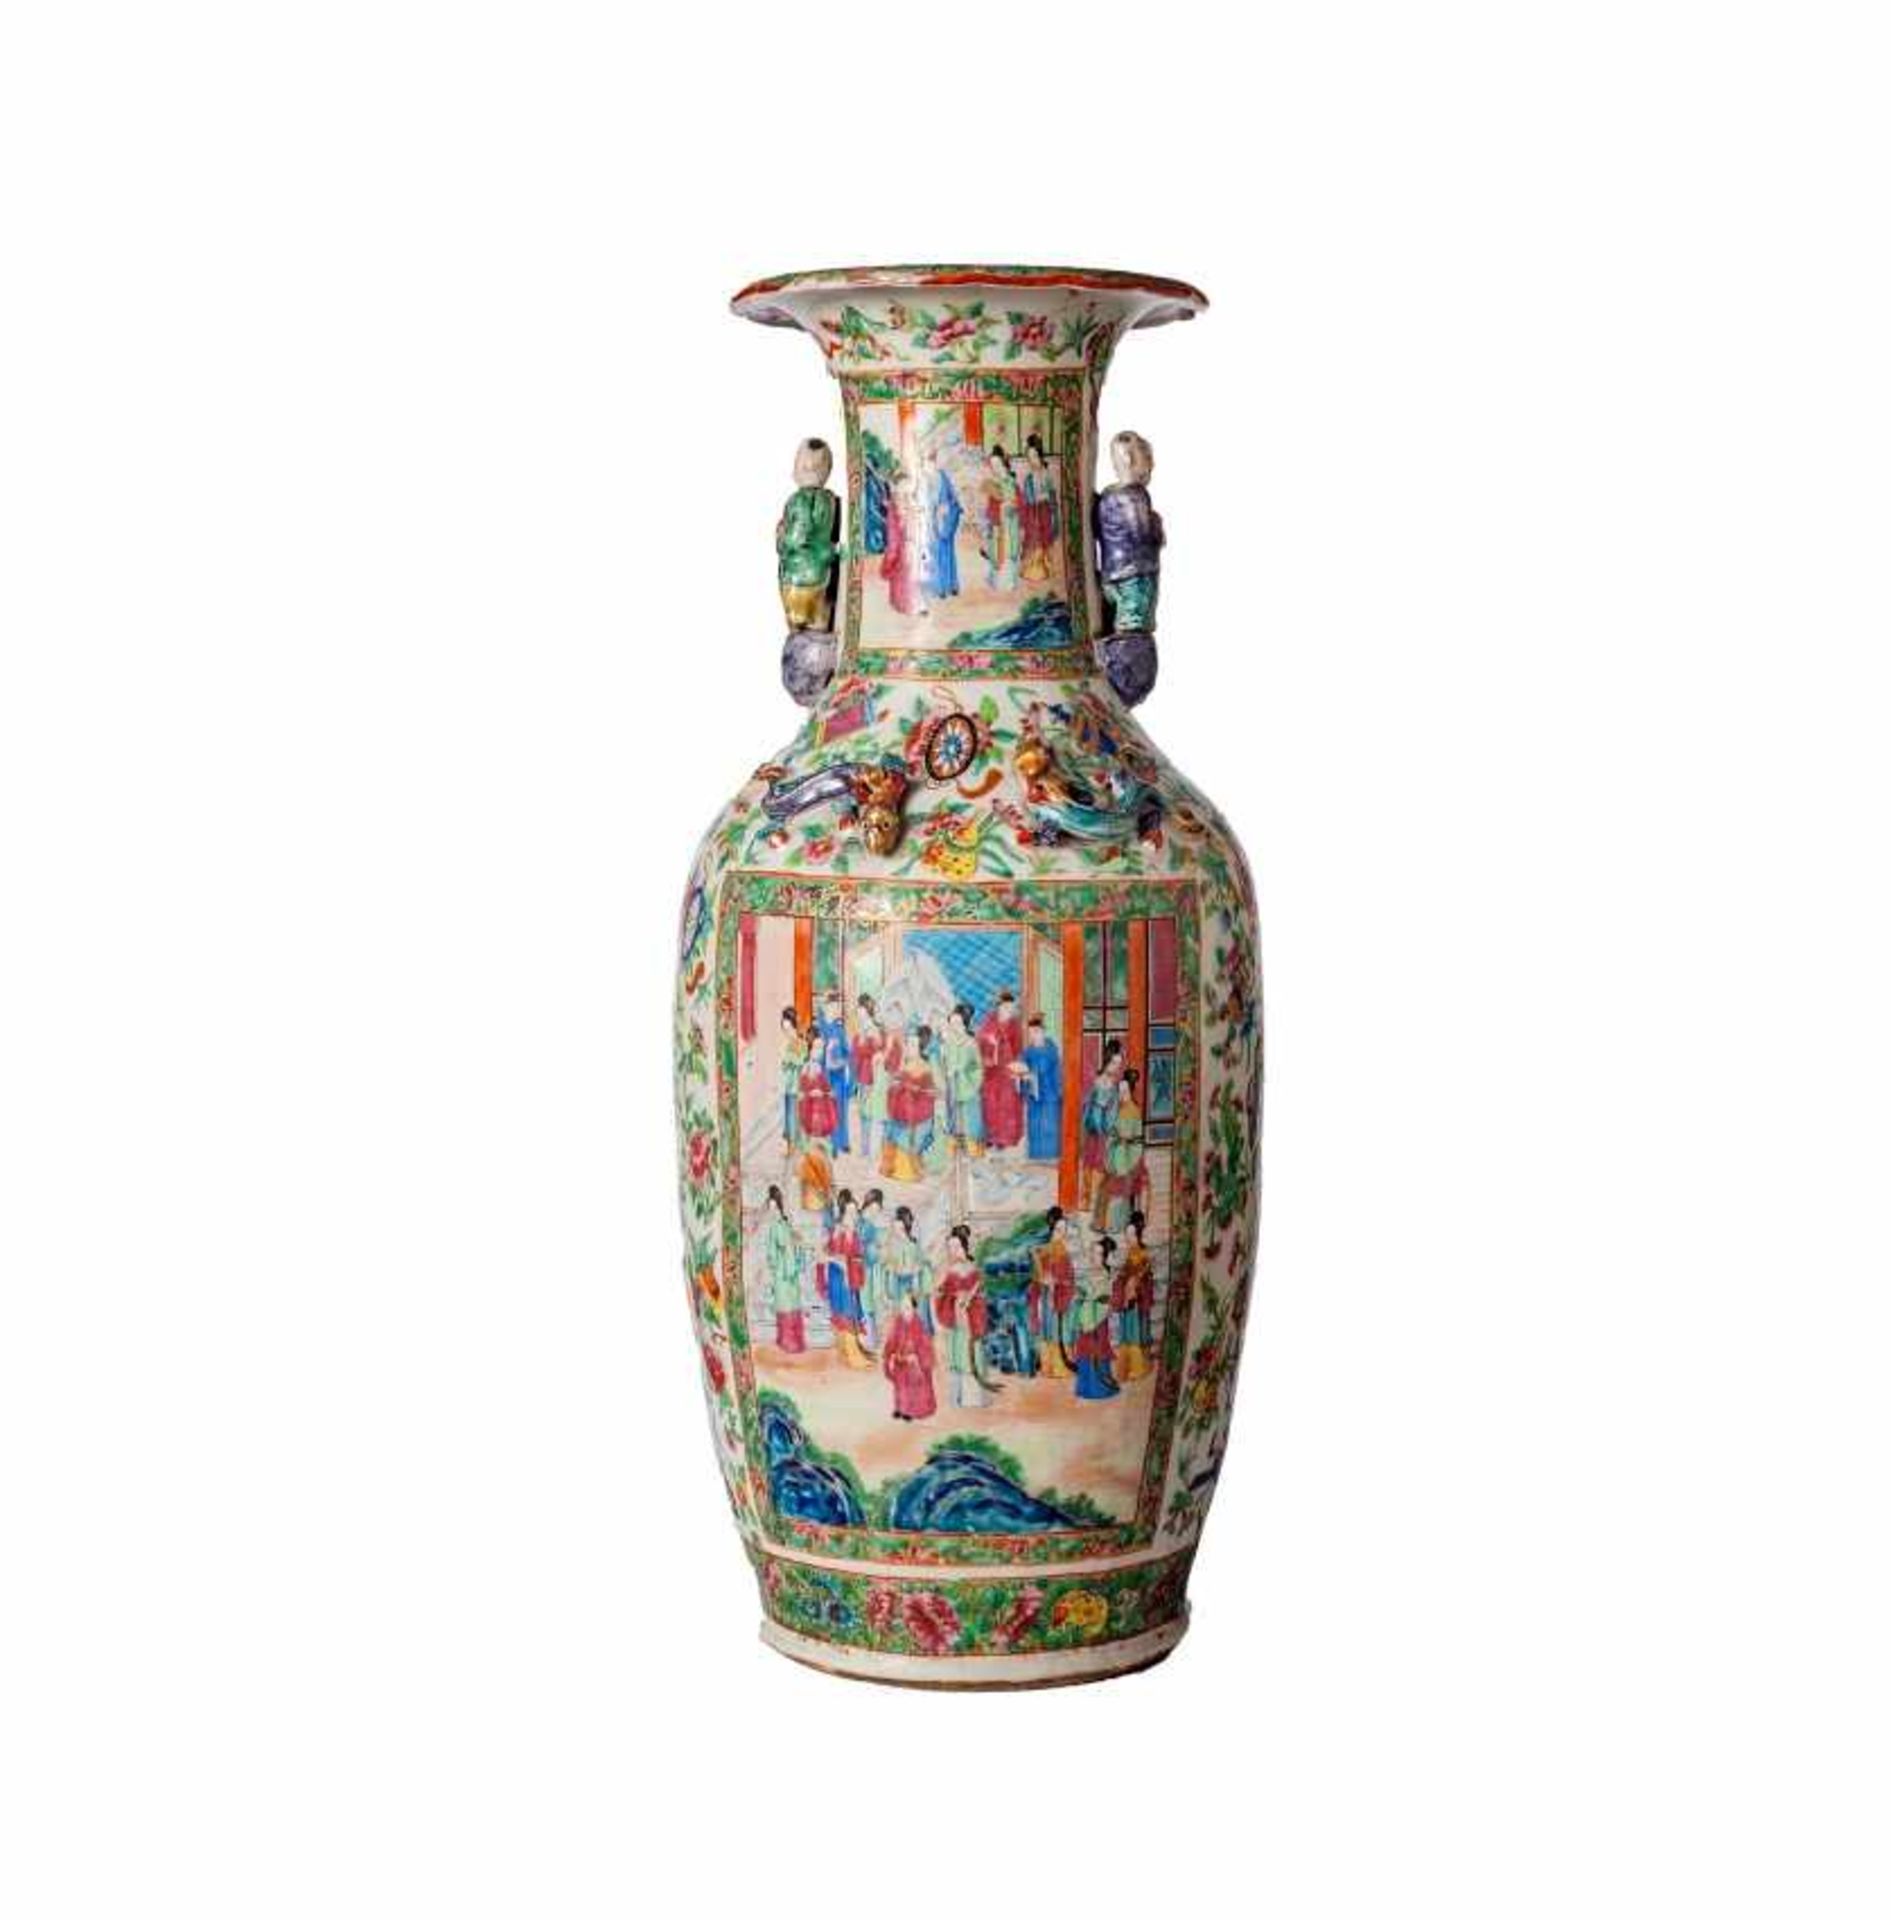 Chinese vase in Canton porcelain, 19th CenturyChinese vase in Canton porcelain, 19th Century59 cm (